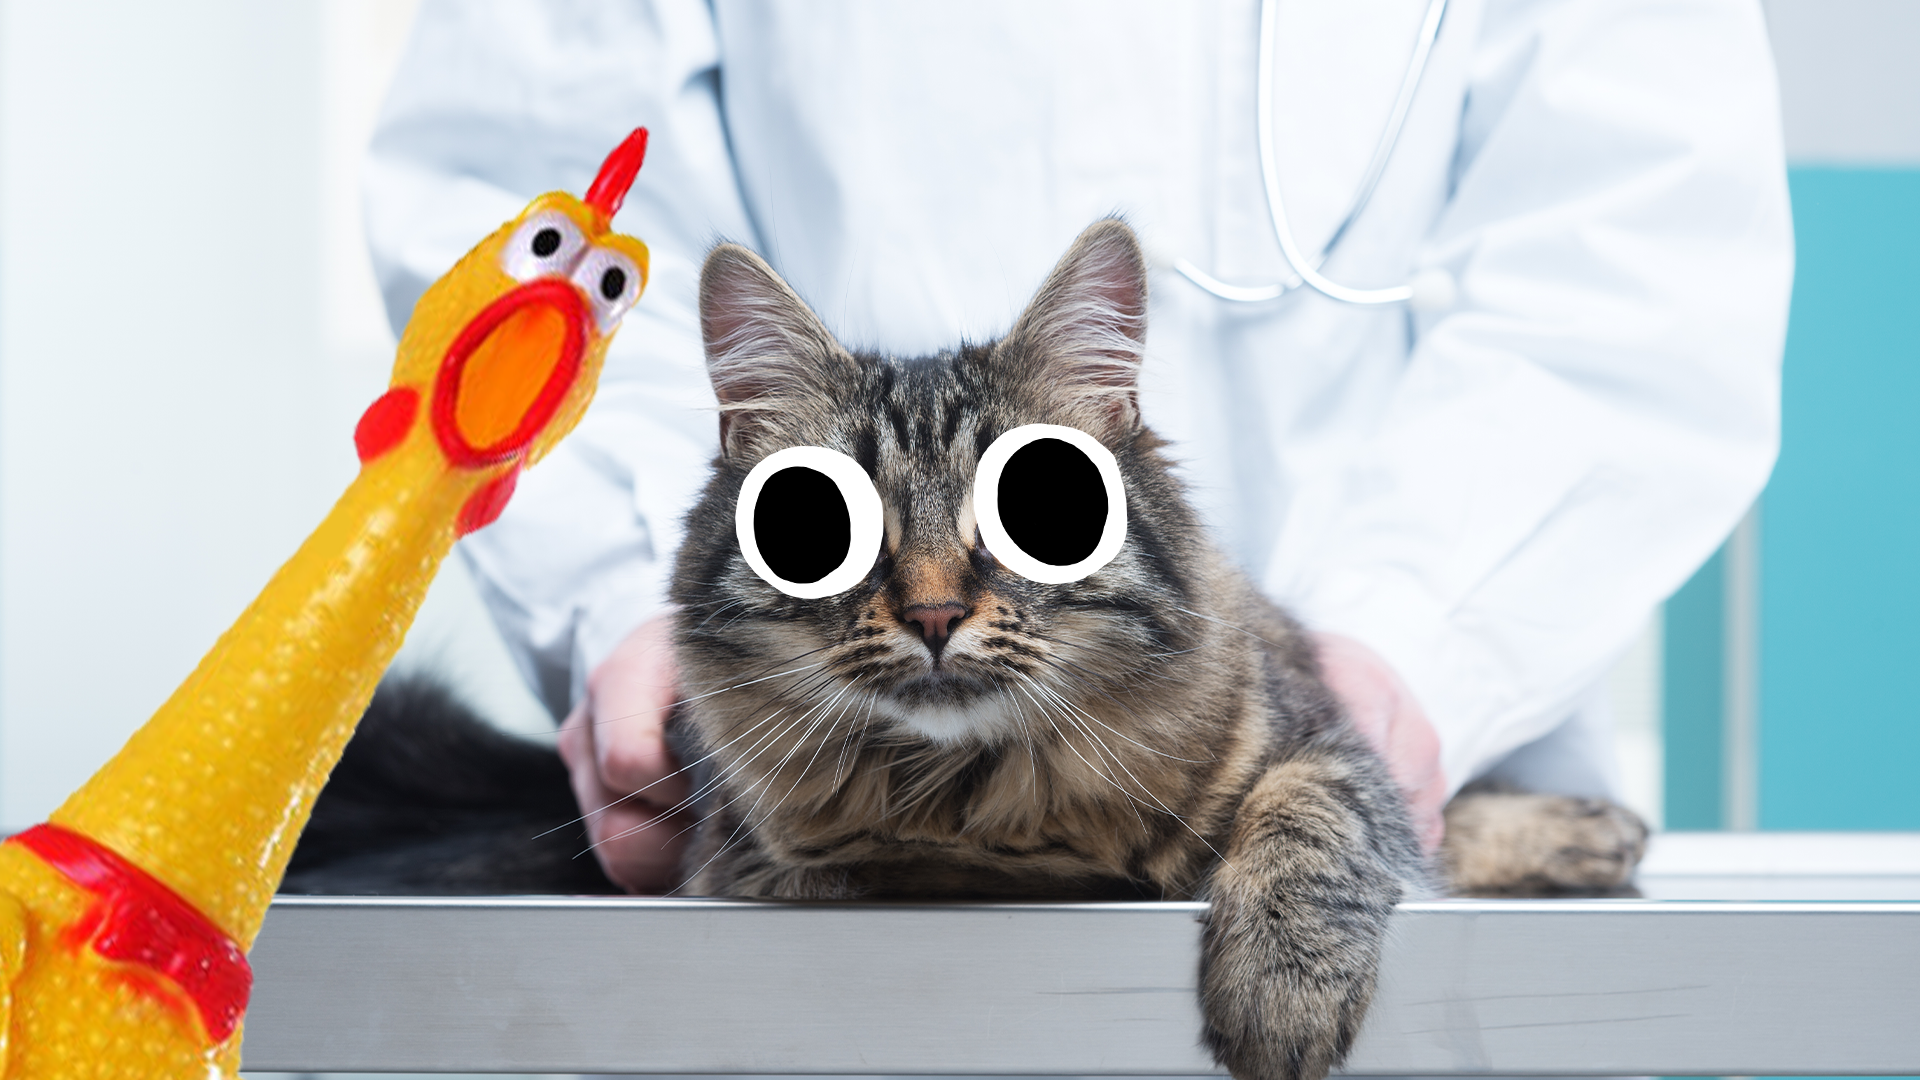 A cat getting a check-up at the vet, while a rubber chicken looks on